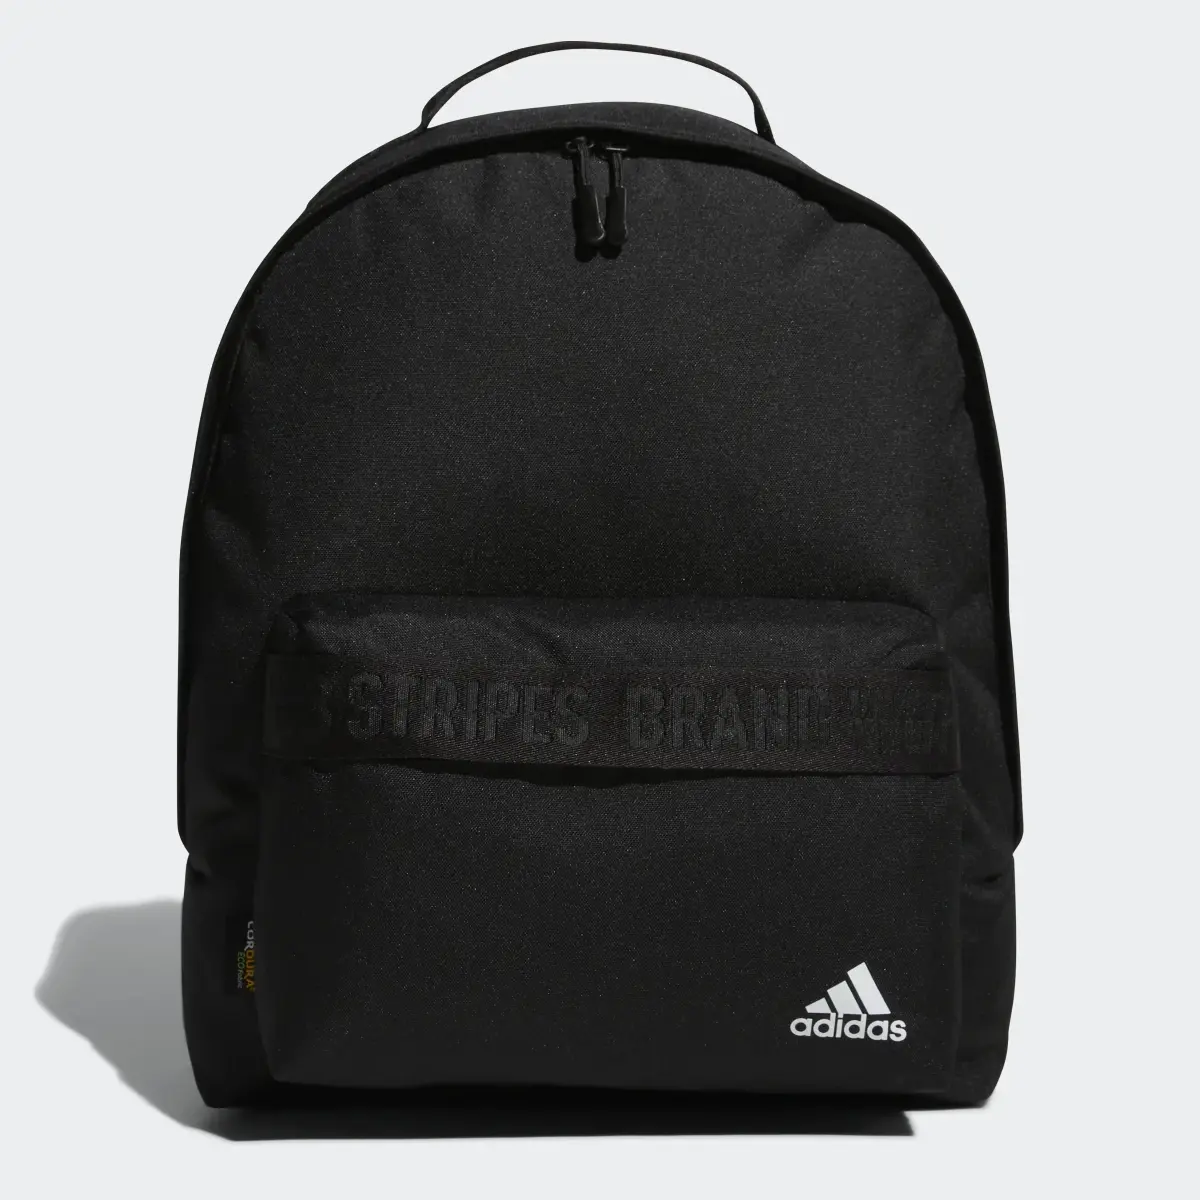 Adidas Must Haves Backpack. 2